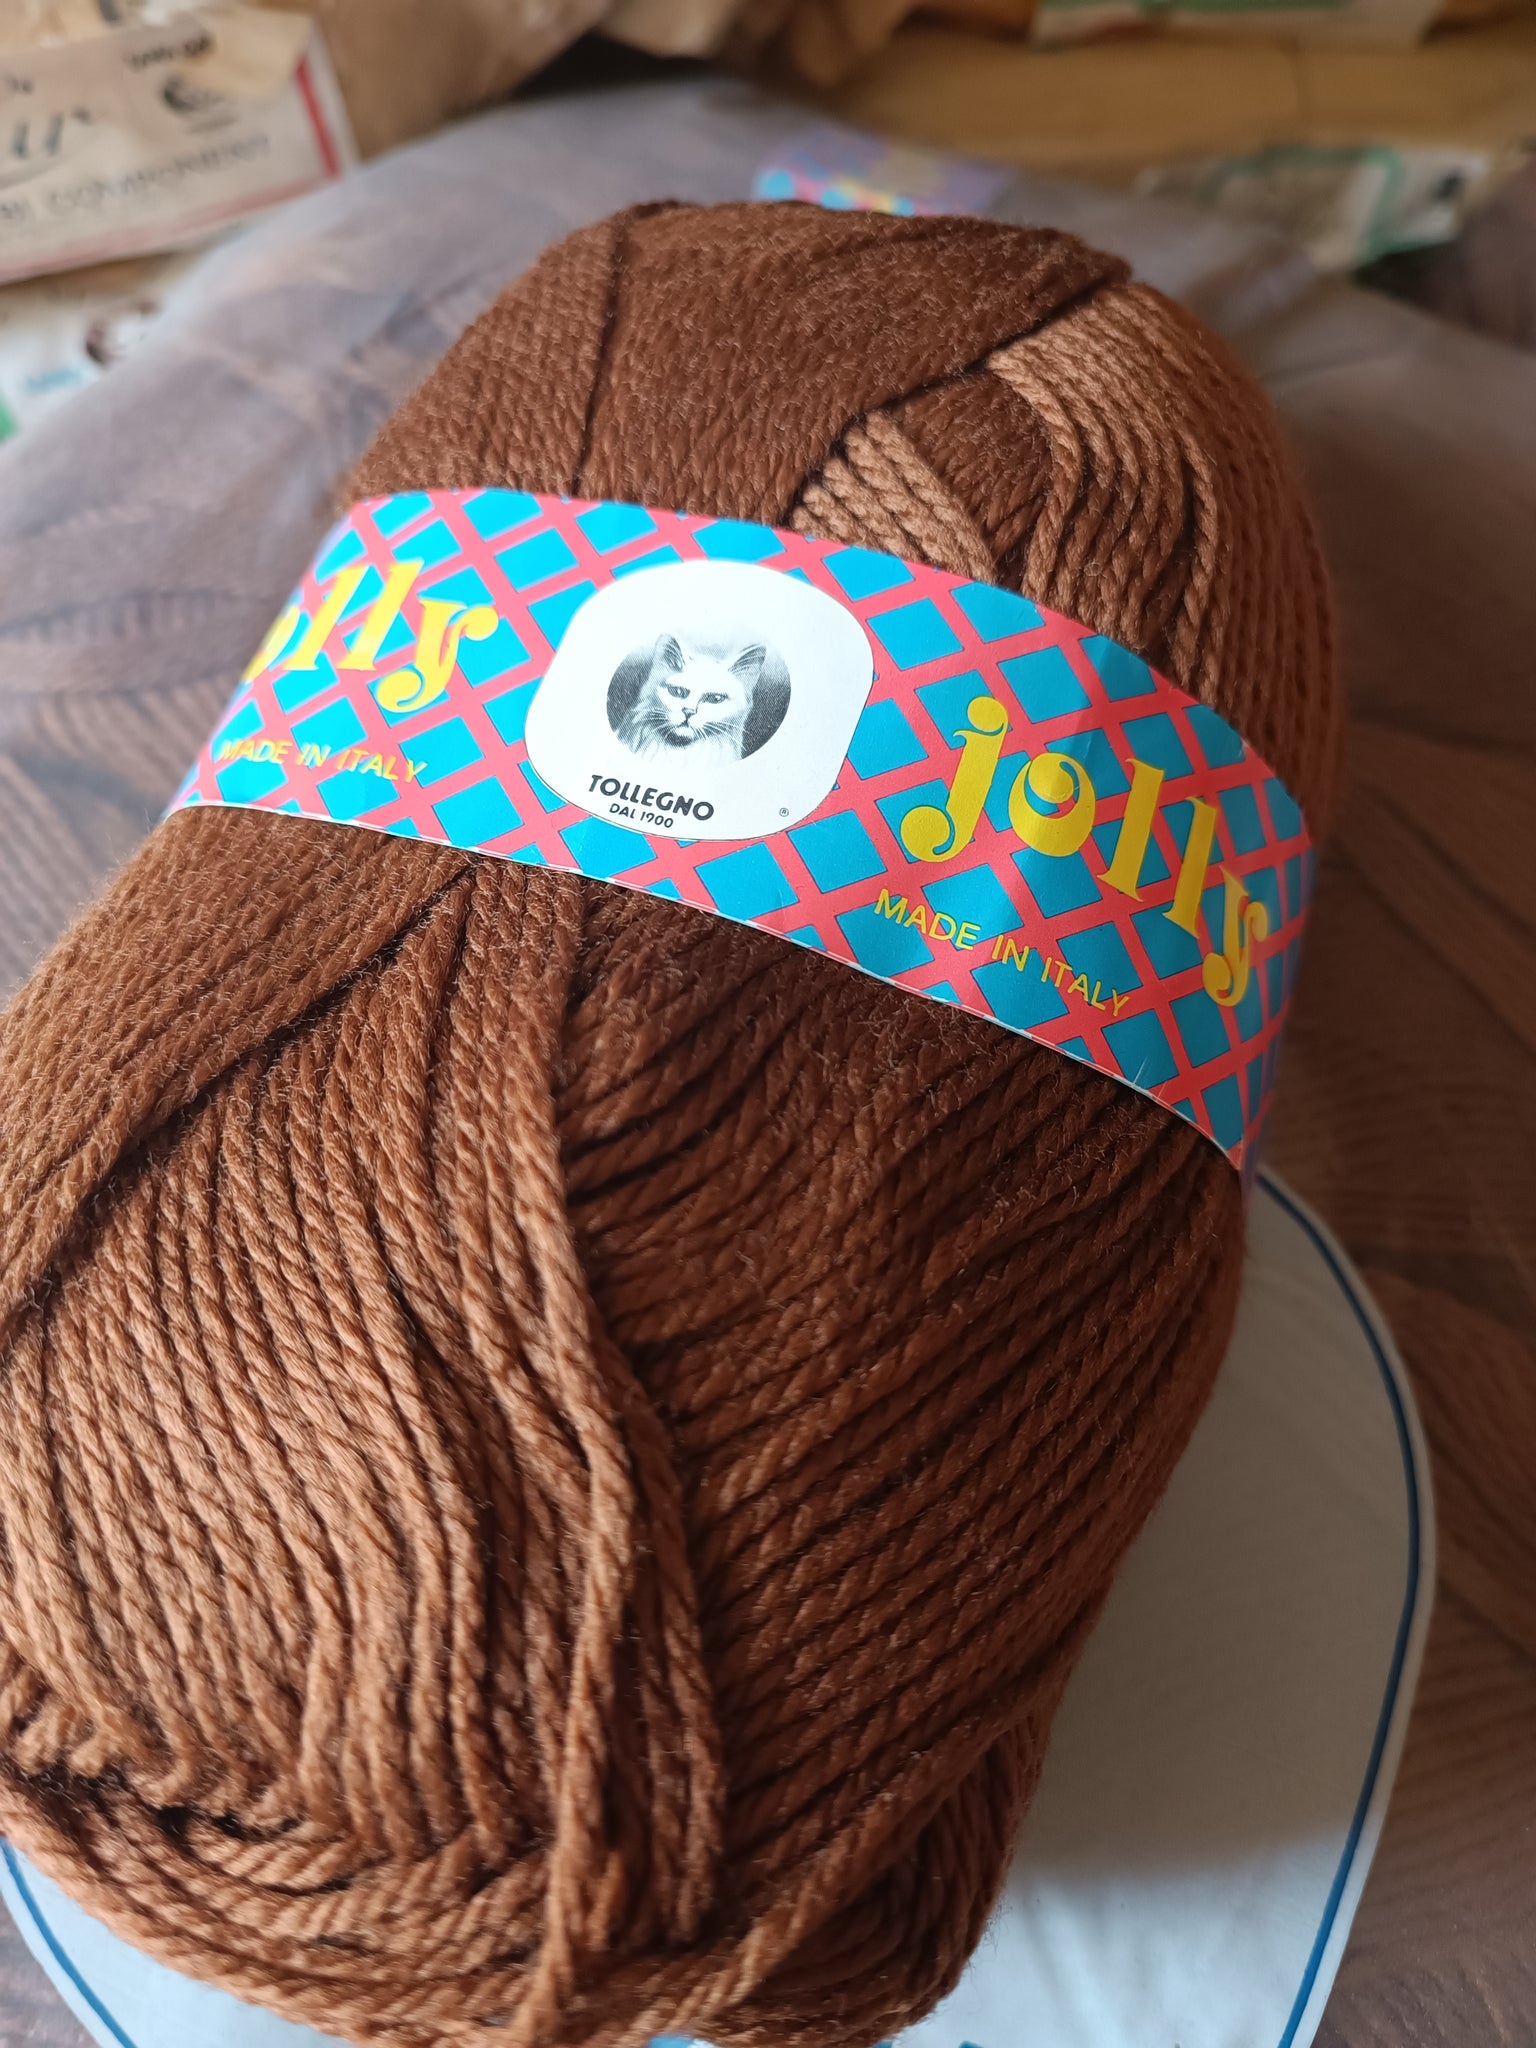 Wool-Ease Thick-and-Quick Yarn - Spice